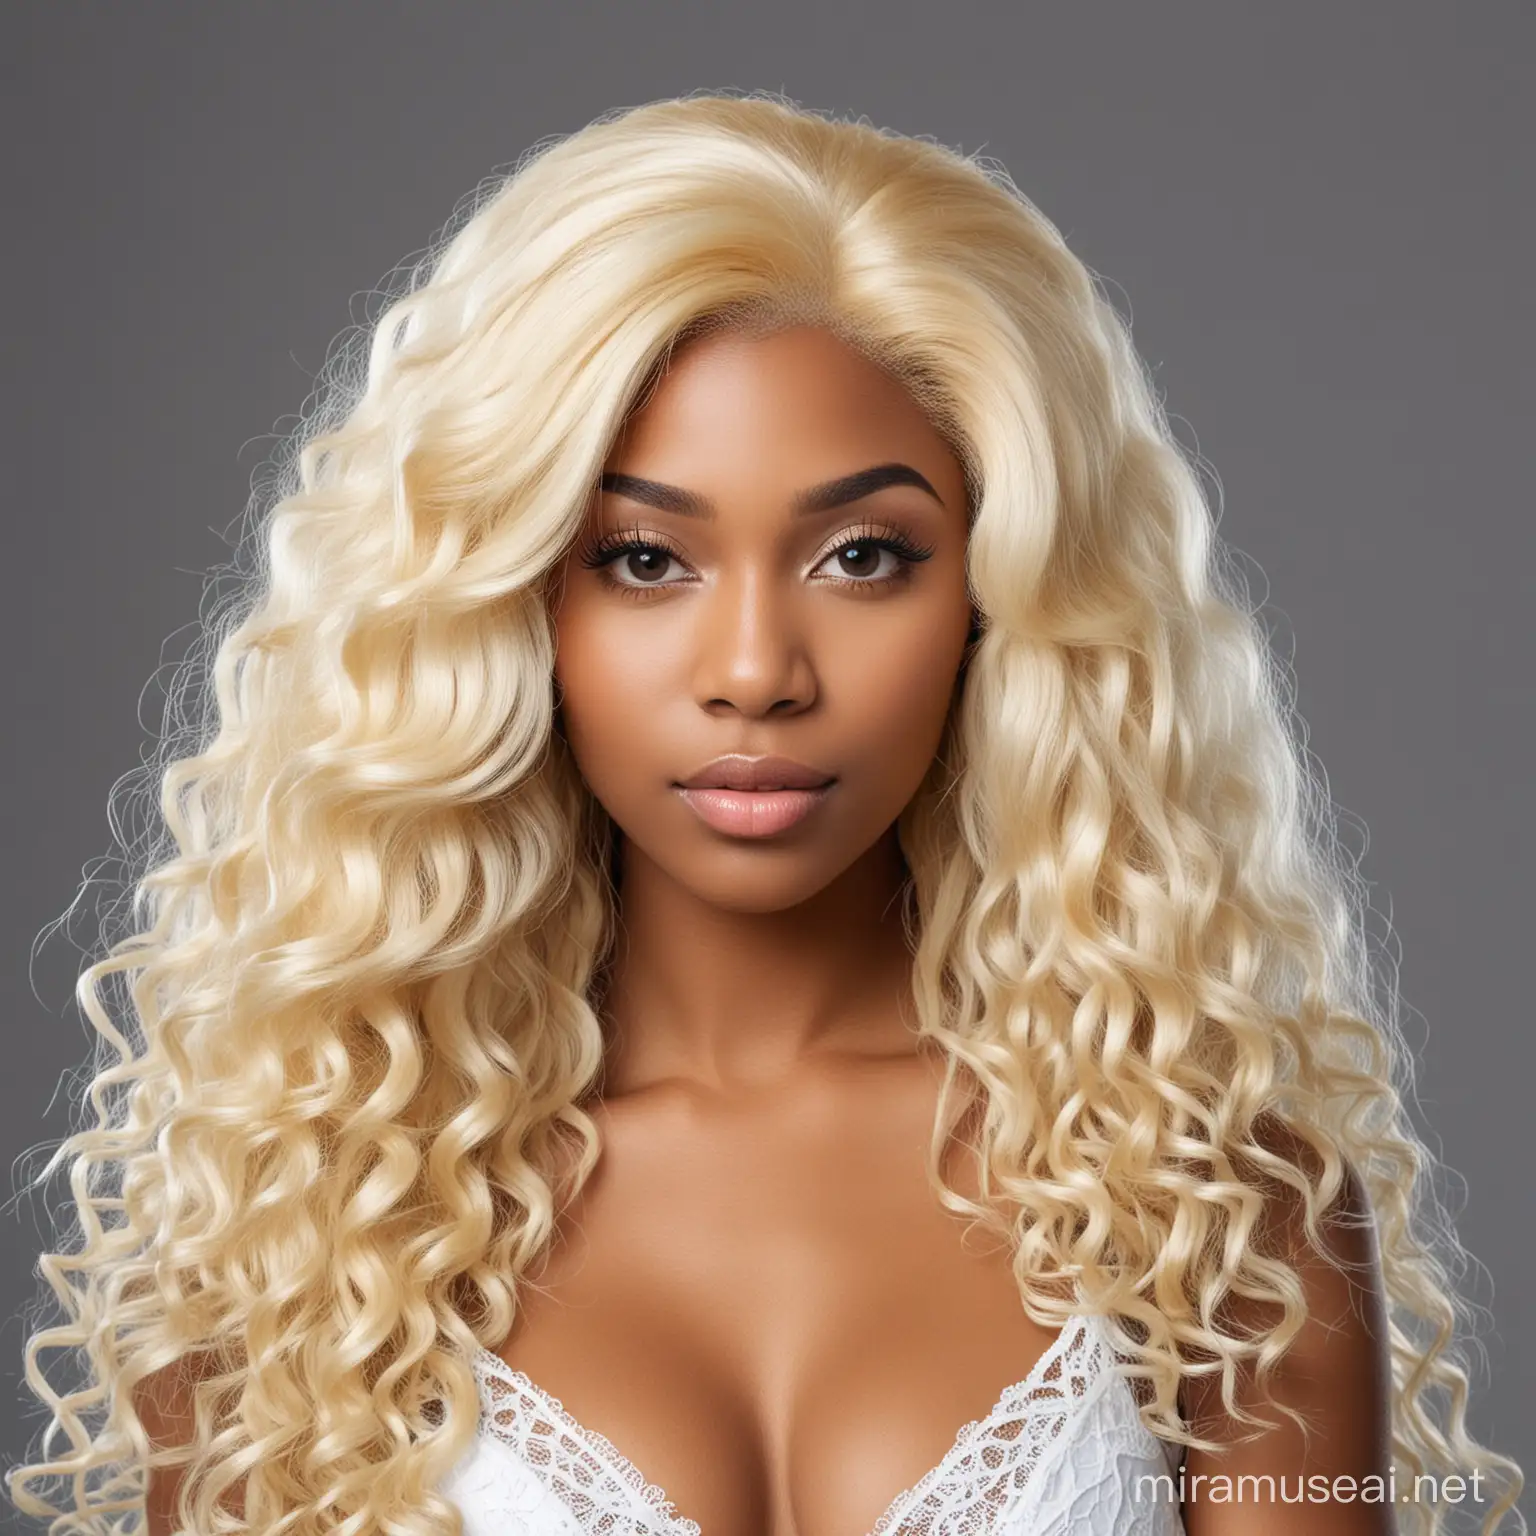 Portrait of a Young Black Woman Wearing a Long Blonde Lace Wig